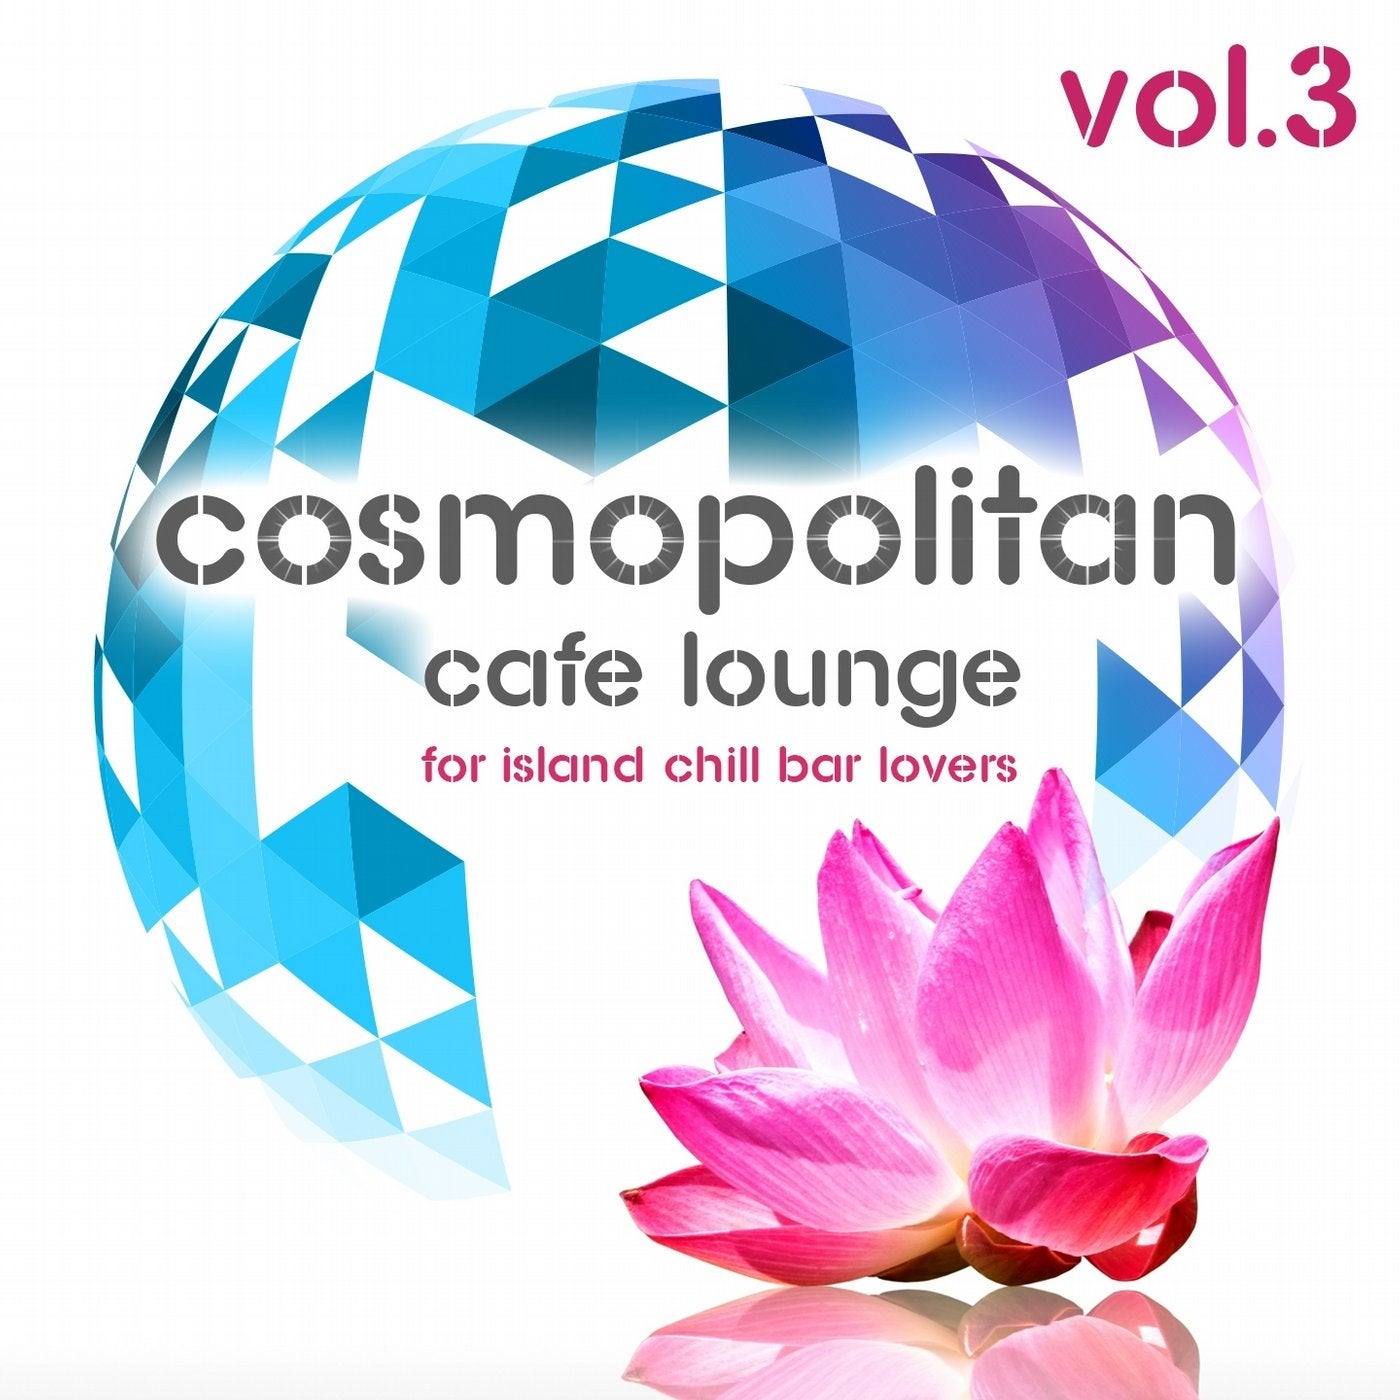 Cosmopolitan Cafe Lounge, Vol. 3 (For Island Chill Bar Lovers)